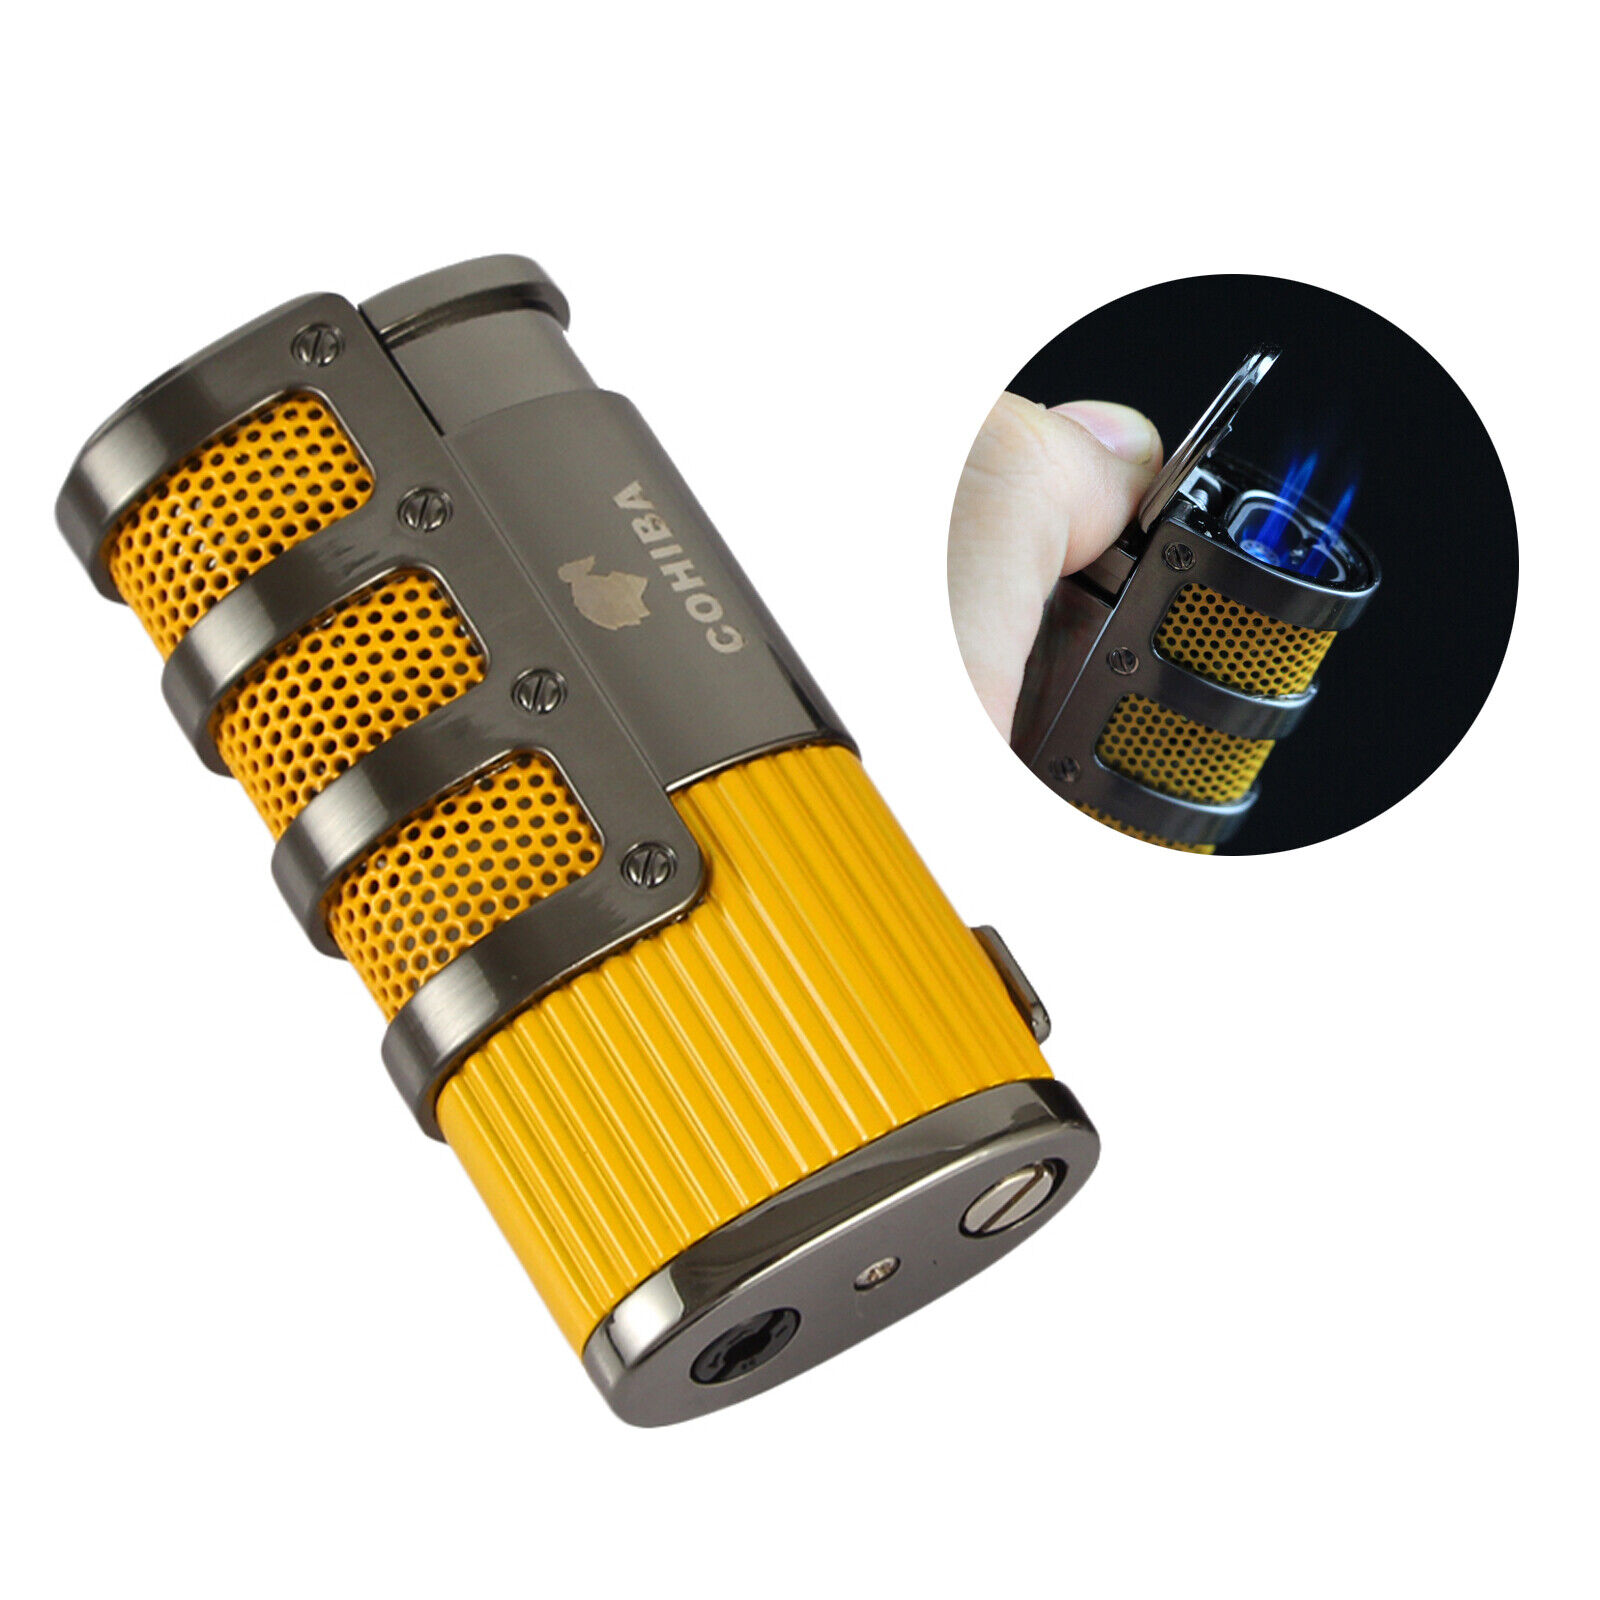 Cohiba Windproof Cigar Lighter 3 Torch Metal Jet Flame Pocket Lighters w/ Punch